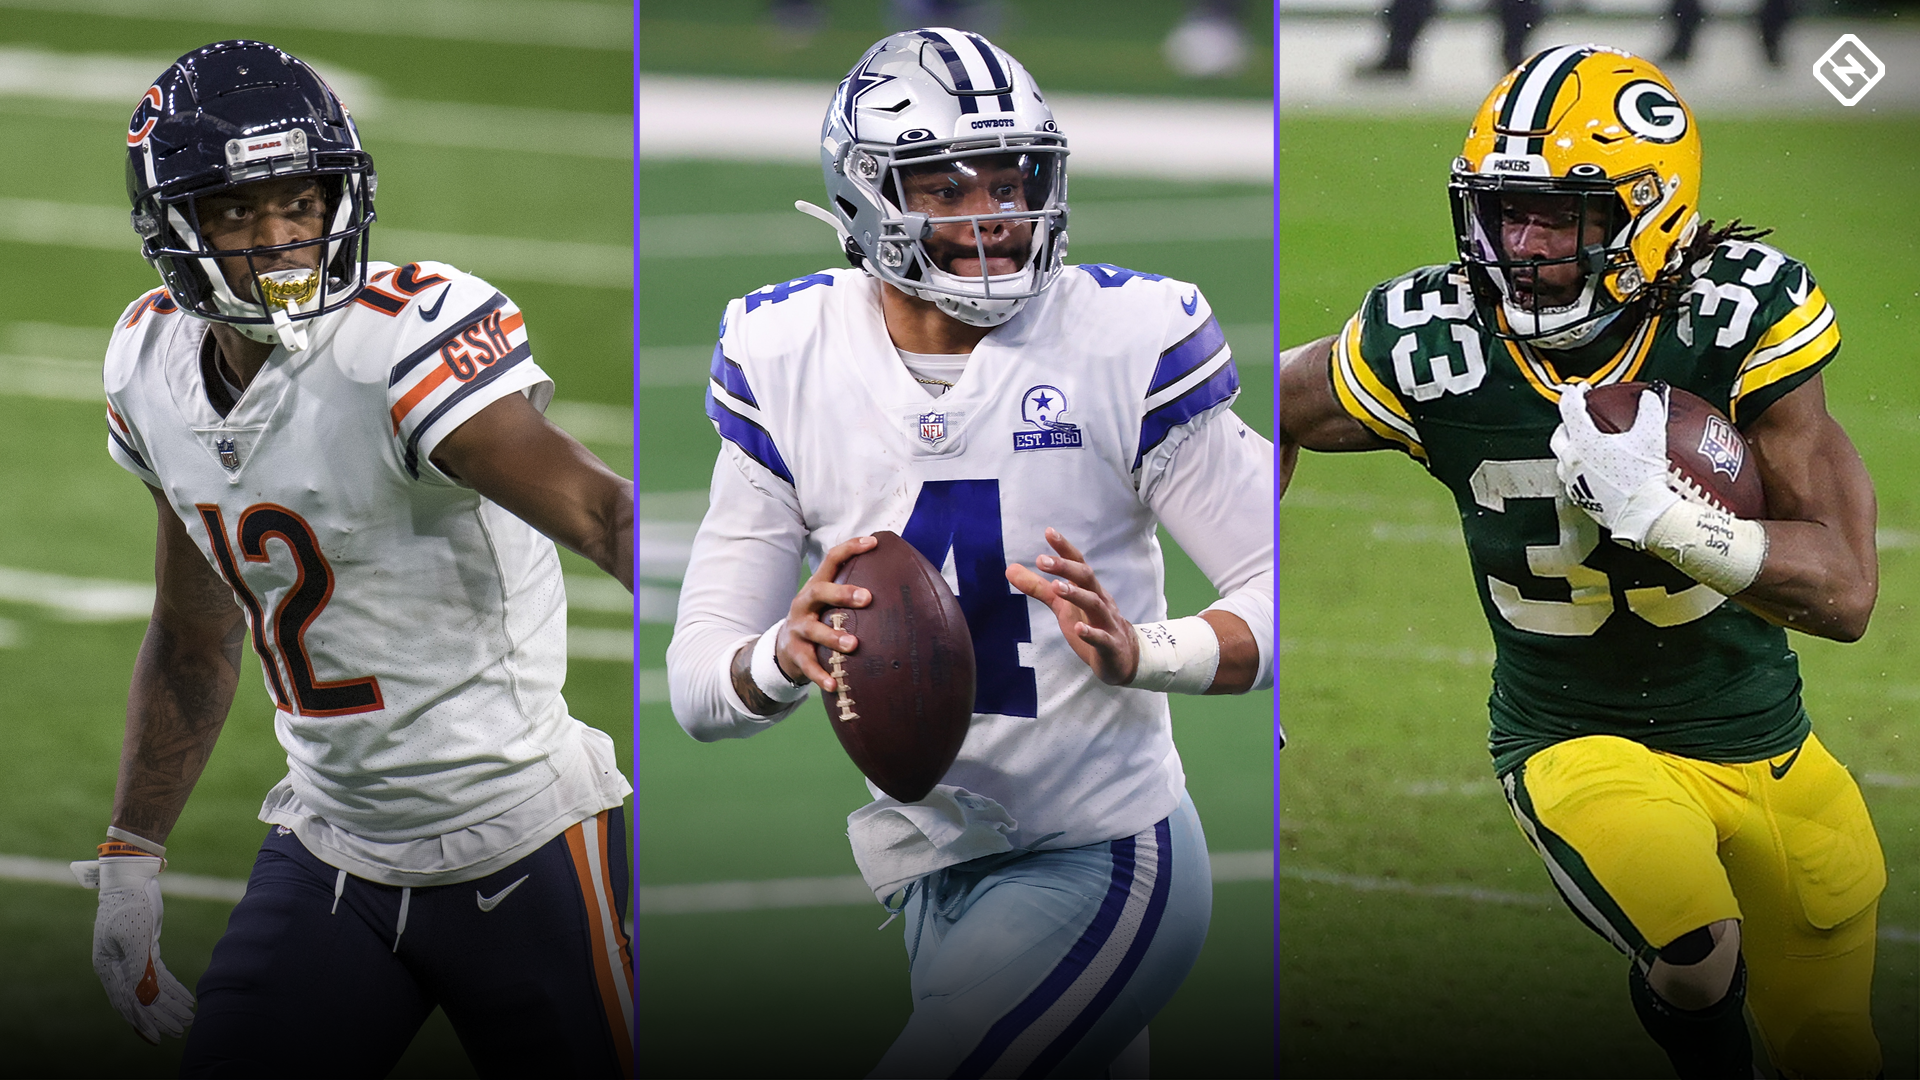 Top 10 NFL Best Players for 2021